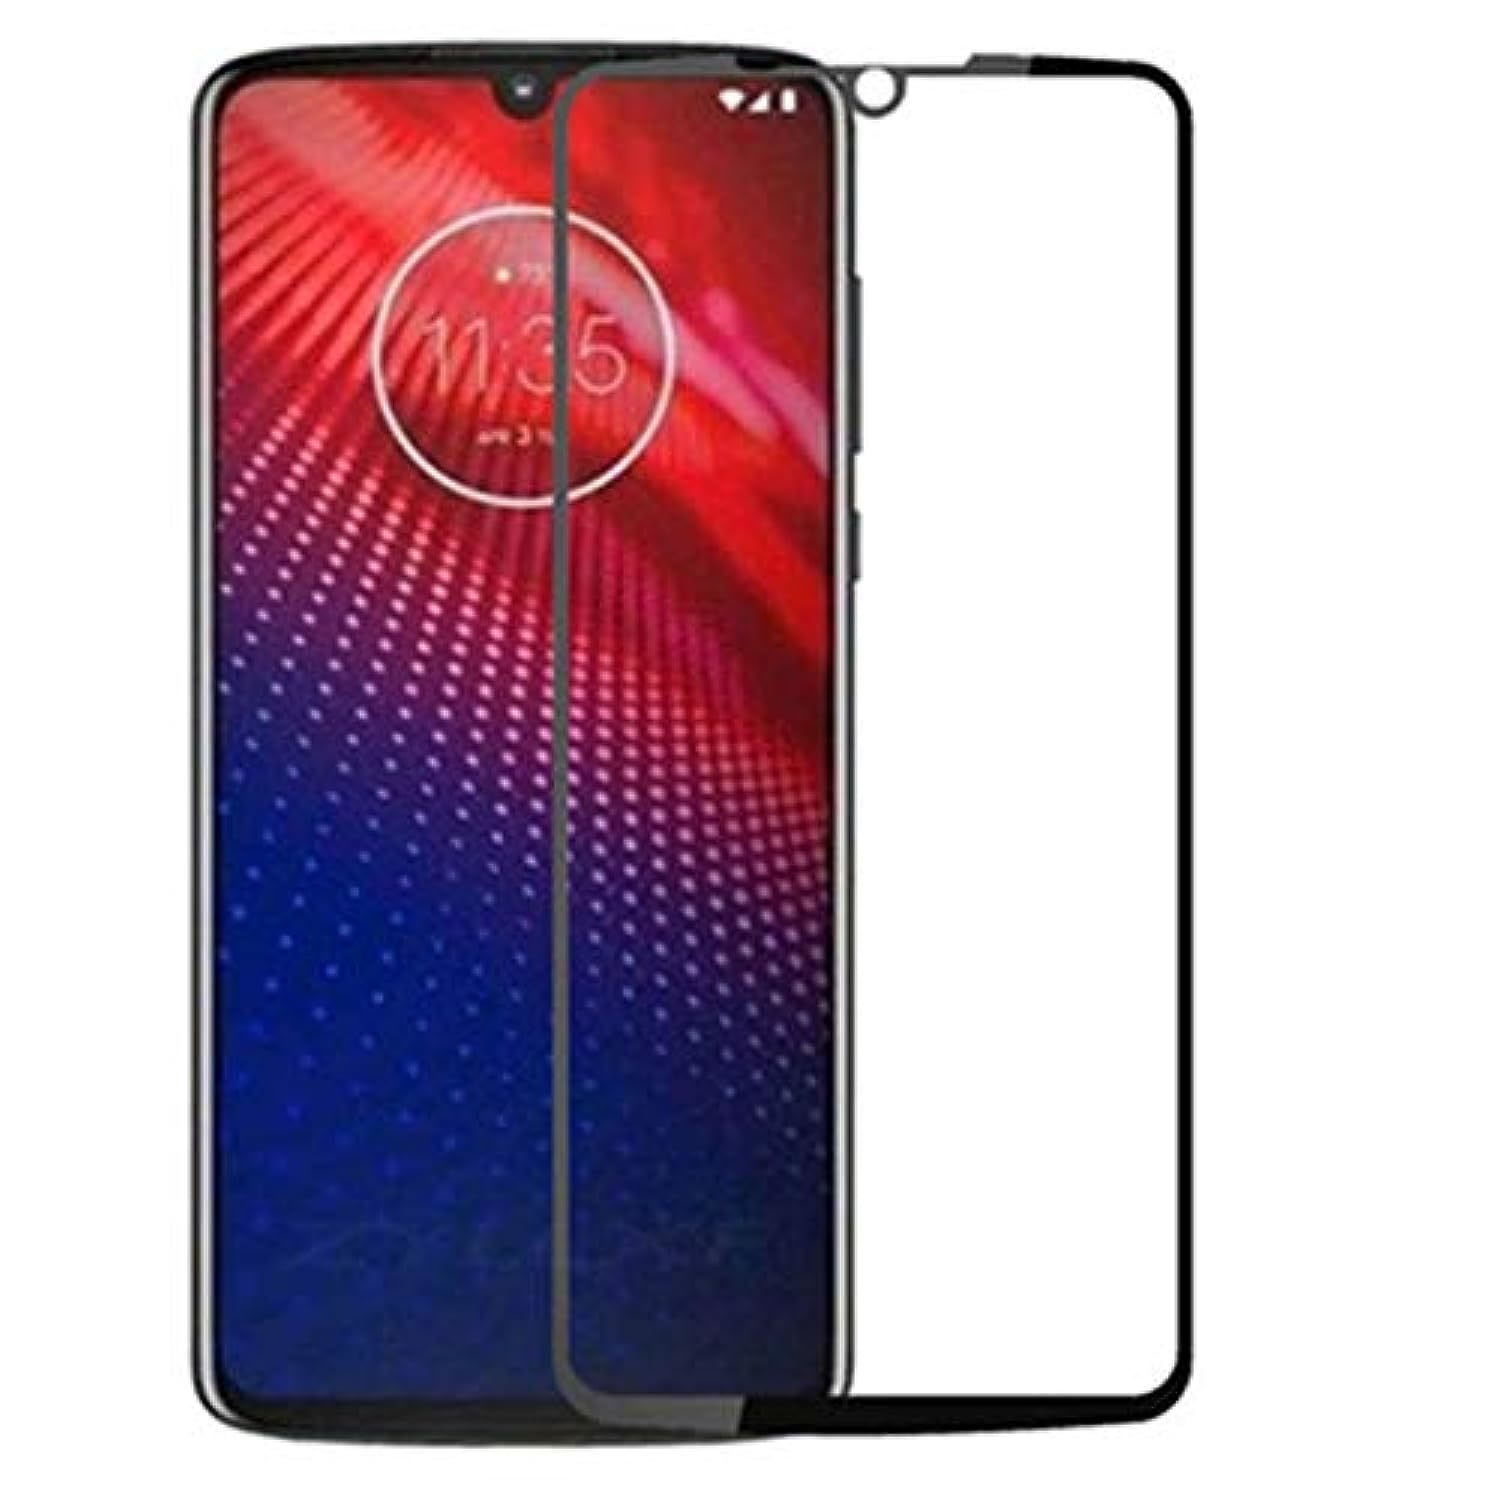 Primary image for For Motorola Moto Z4 Full Coverage Screen Protector Tempered Glass - [2 Pack] An